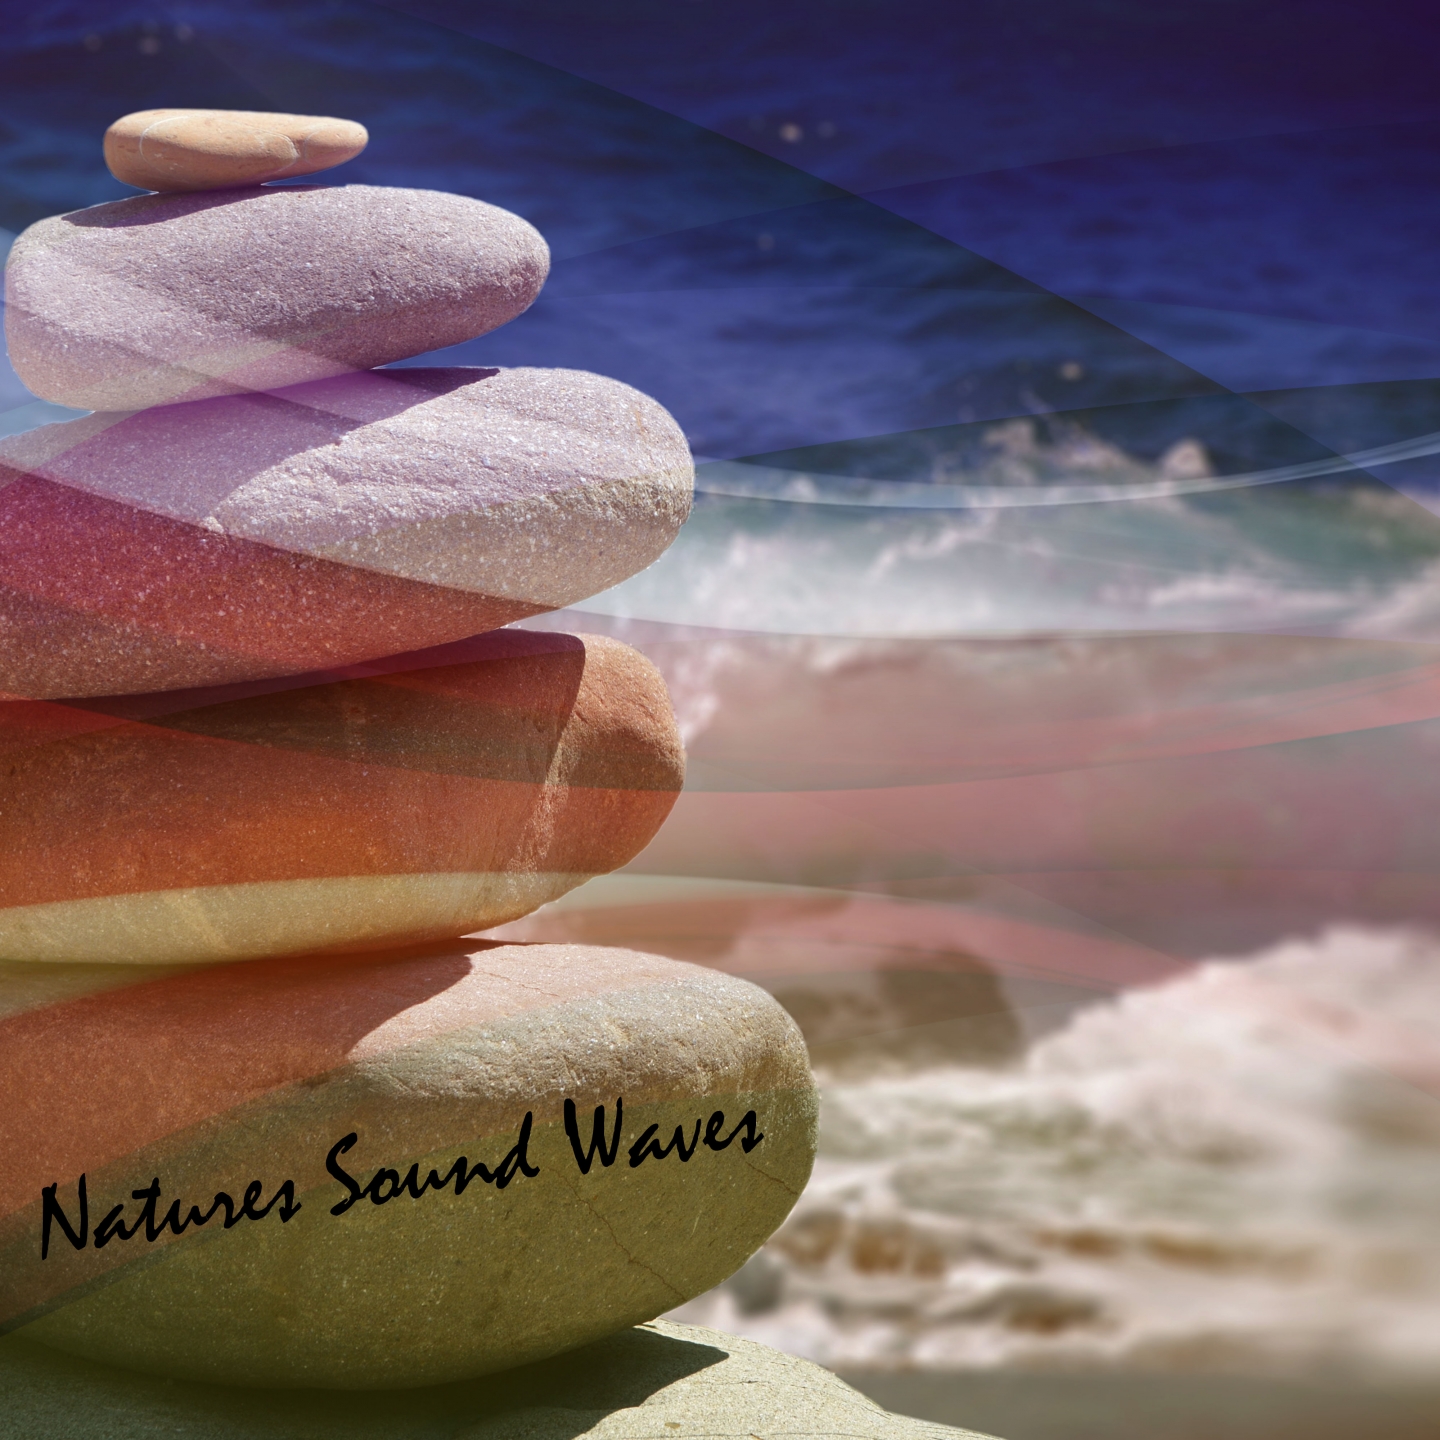 Natures Sound Waves